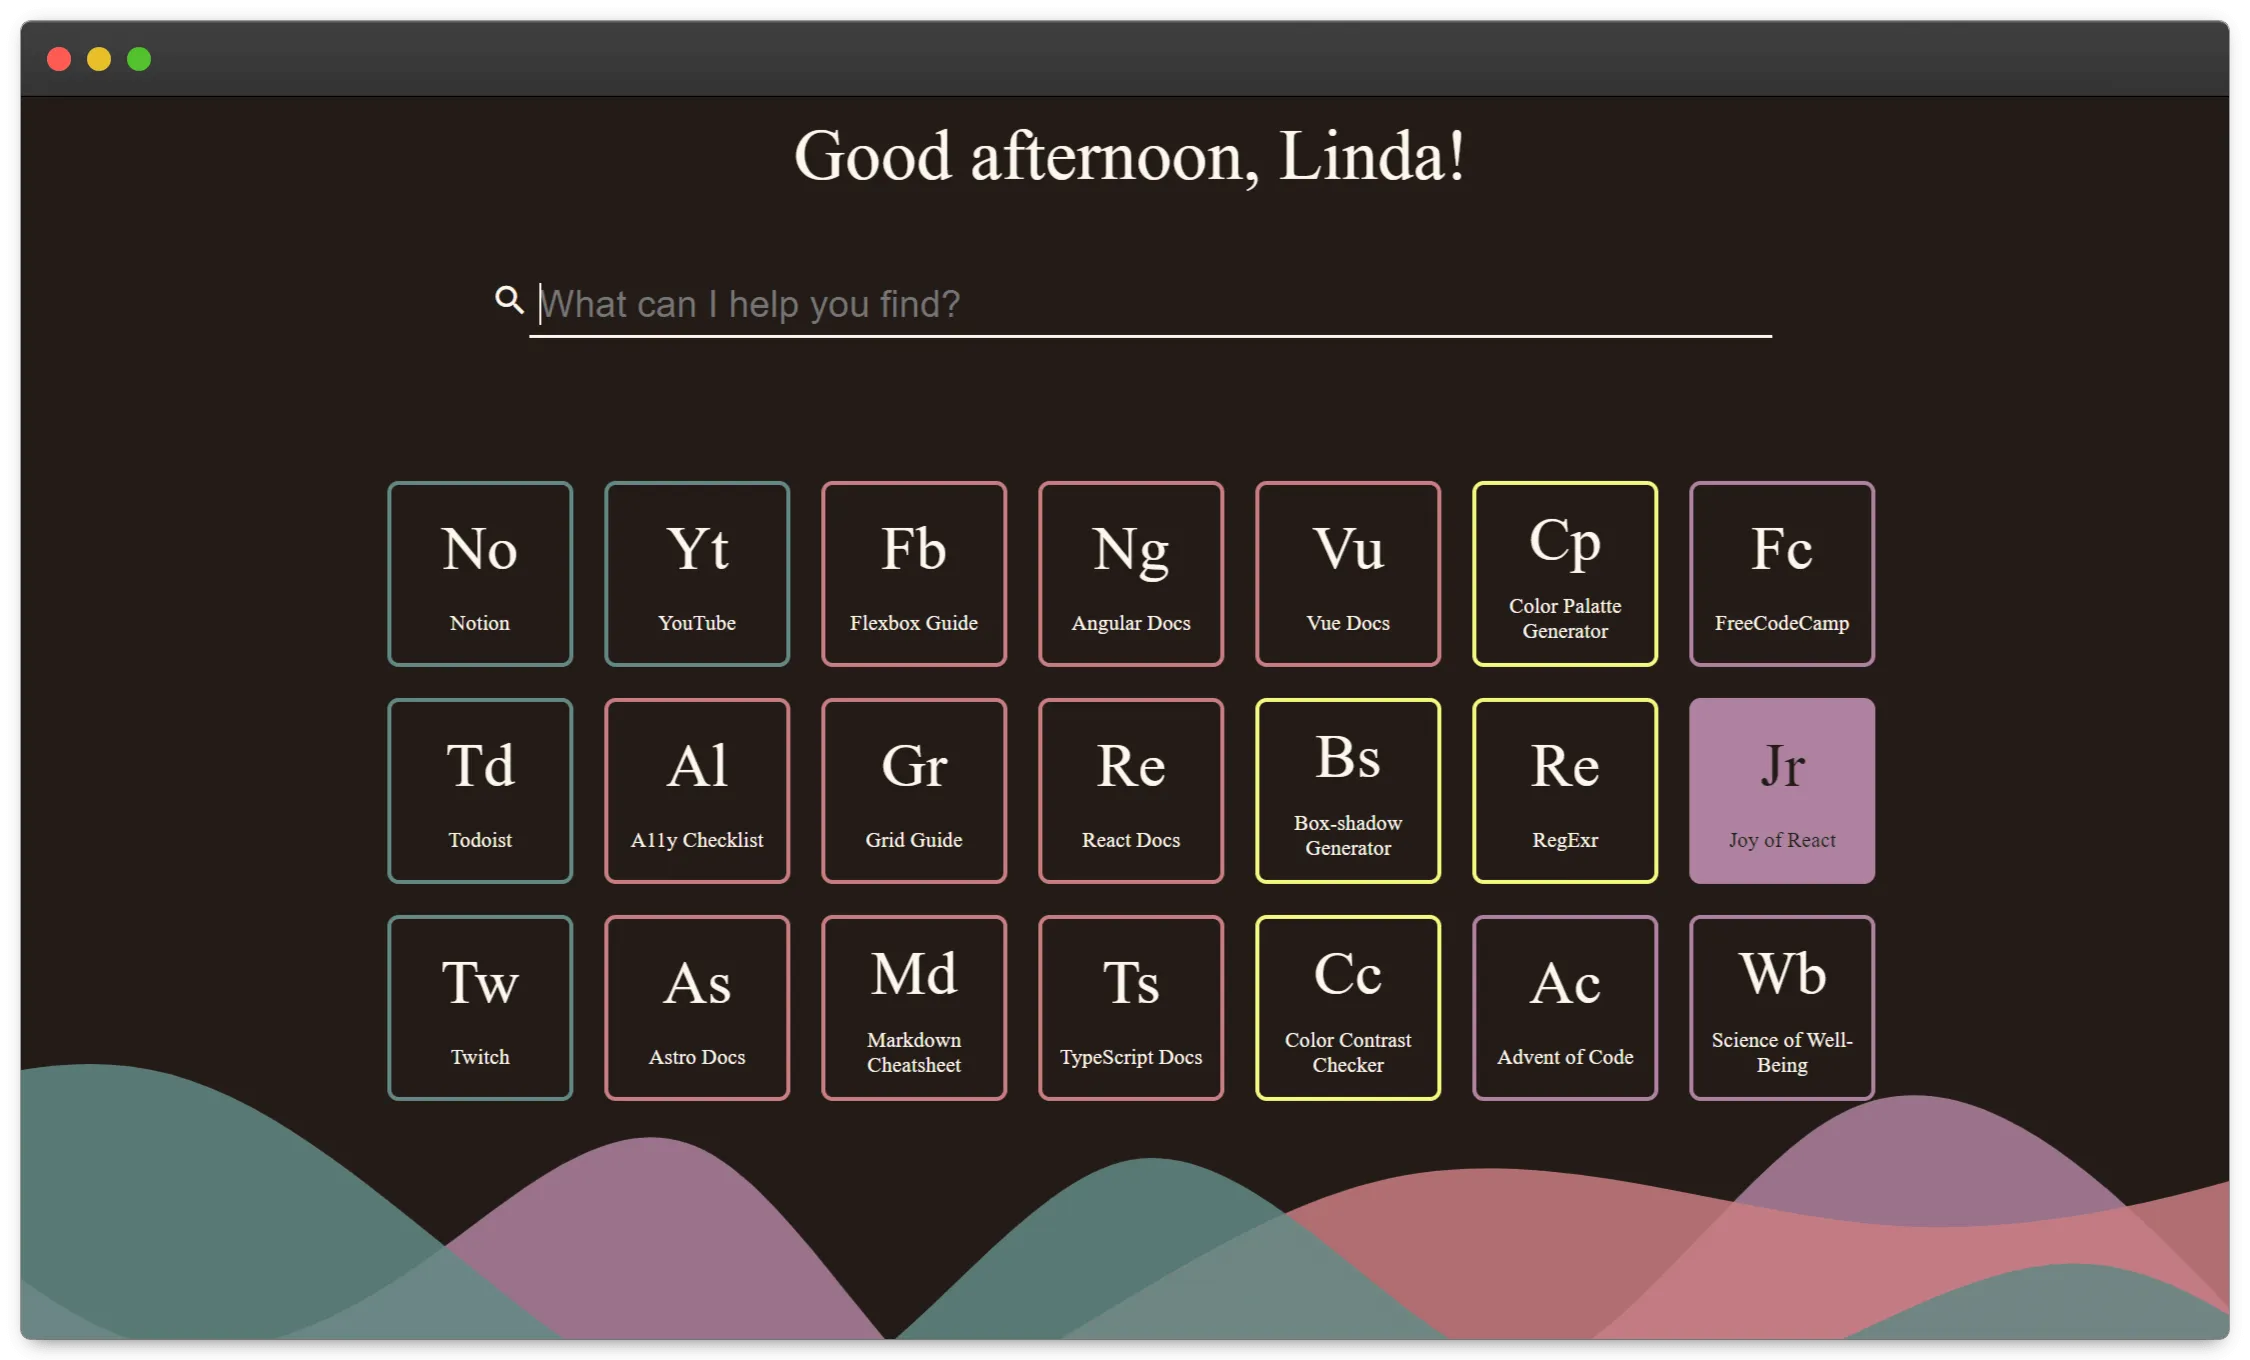 A screen with a chocolate brown background. Centered at the top are the words 'Good afternoon Linda'. In a column below this is a search bar, a grid of squares, and some decorative colorful waves at the bottom. Each square in the grid is a link to a different webpage, with an abbreviation of the page name, the page name itself, and a border in green, pink, yellow, or purple.